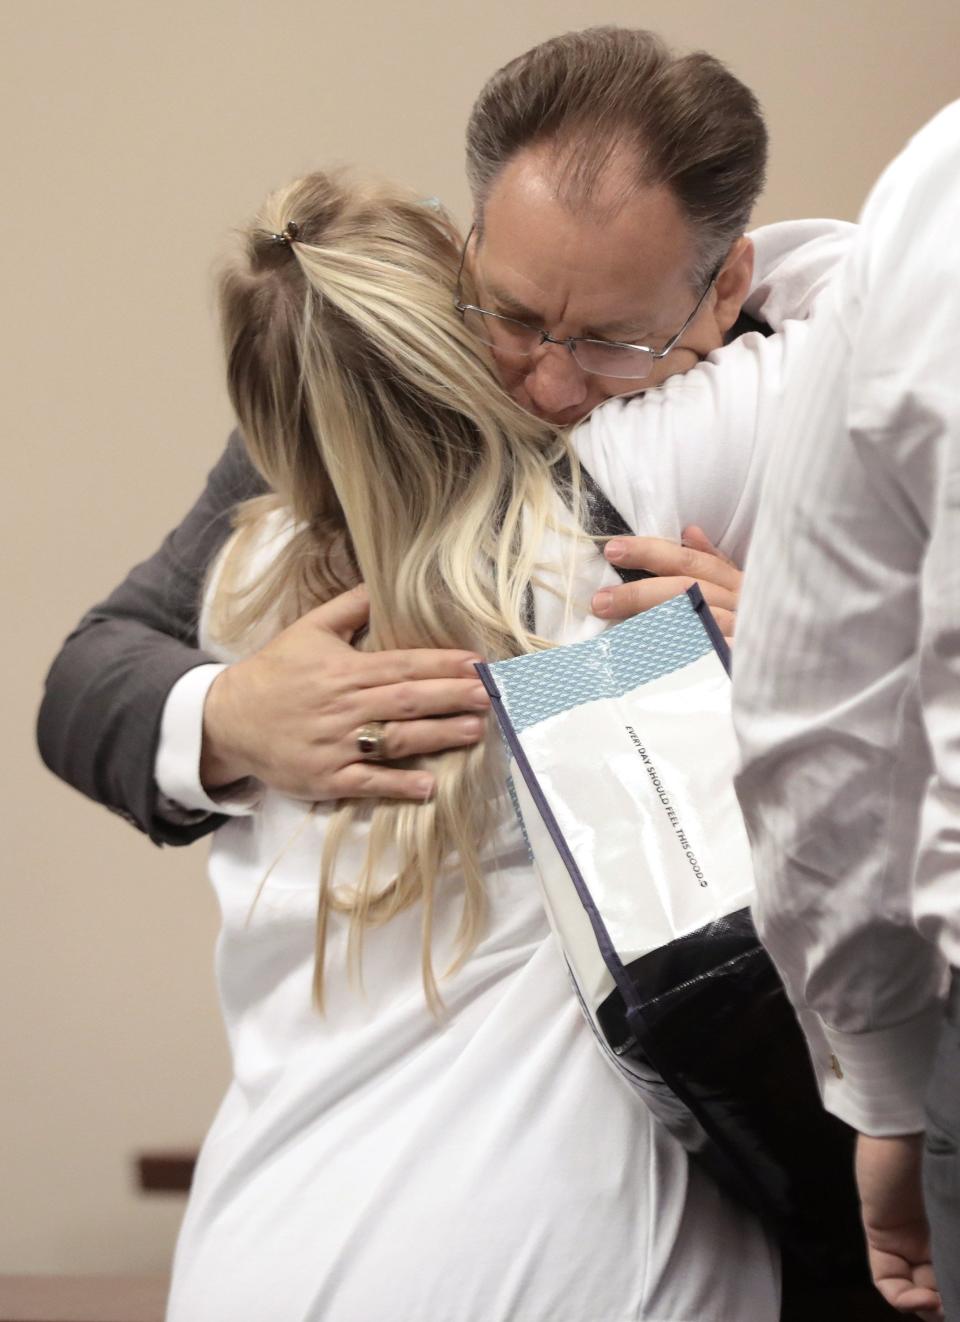 Stacy Bailey, the mother of Tristyn Bailey, hugs Assistant State Attorney Mark Johnson at the conclusion of Monday's surprise plea in the murder of her 13-year-old daughter. Aiden Fucci pleaded guilty to first-degree murder with a minimum sentence of 40 years in prison up to life. Jury selection had been scheduled for that morning at the St. Johns County Courthouse. Fucci was 14 when he stabbed his classmate the early morning of May 9, 2021.